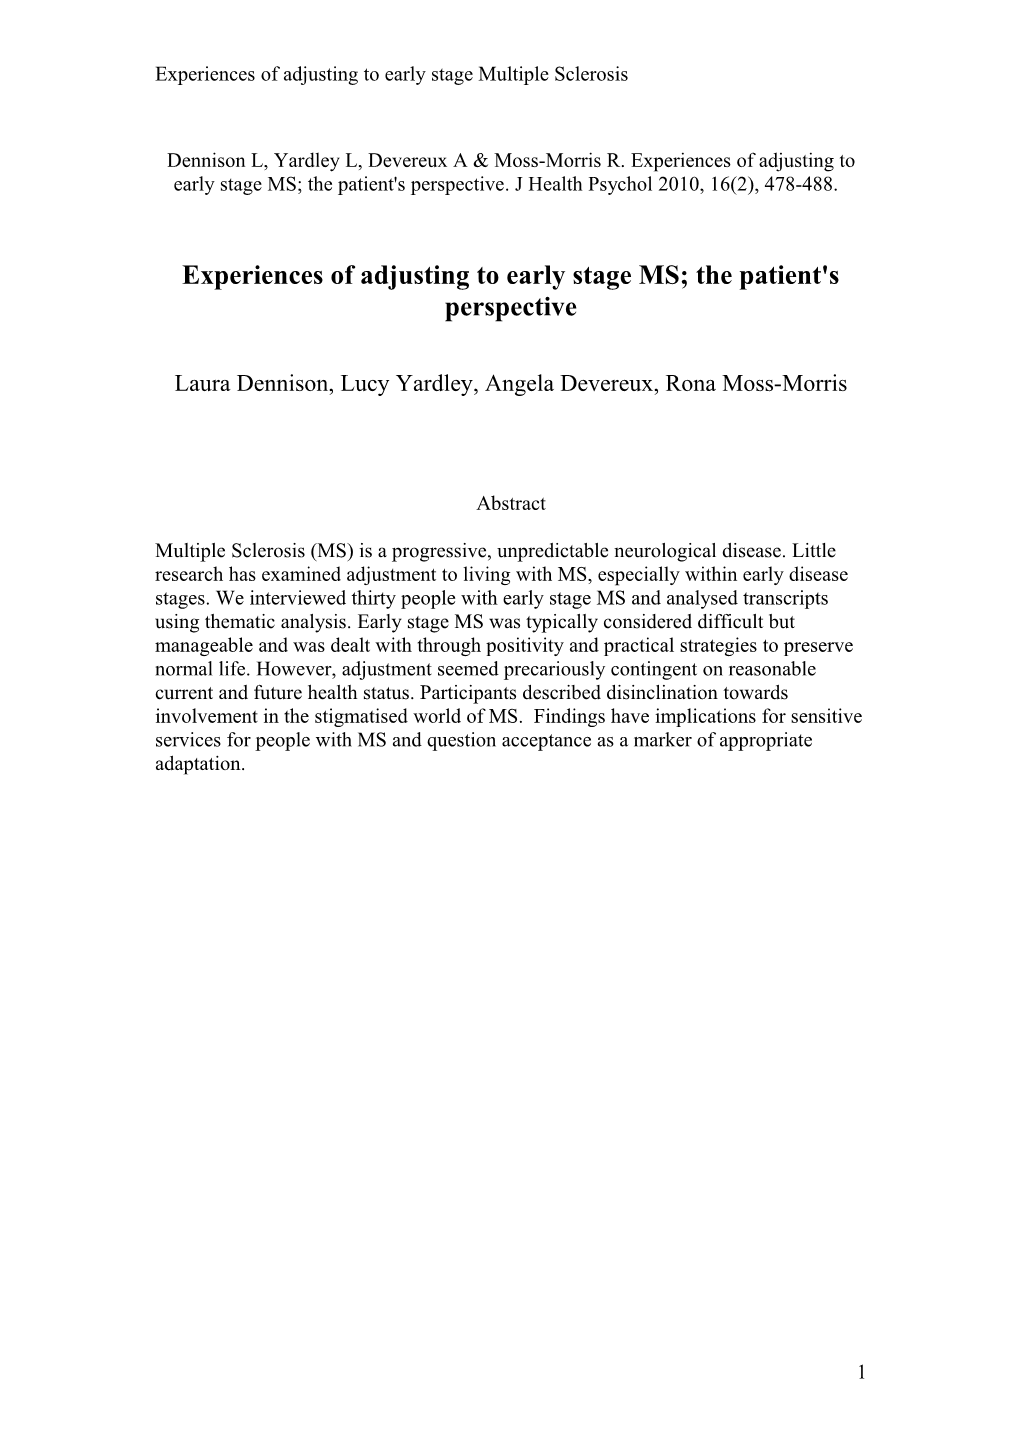 Experiences of Adjusting to Early Stage Multiple Sclerosis